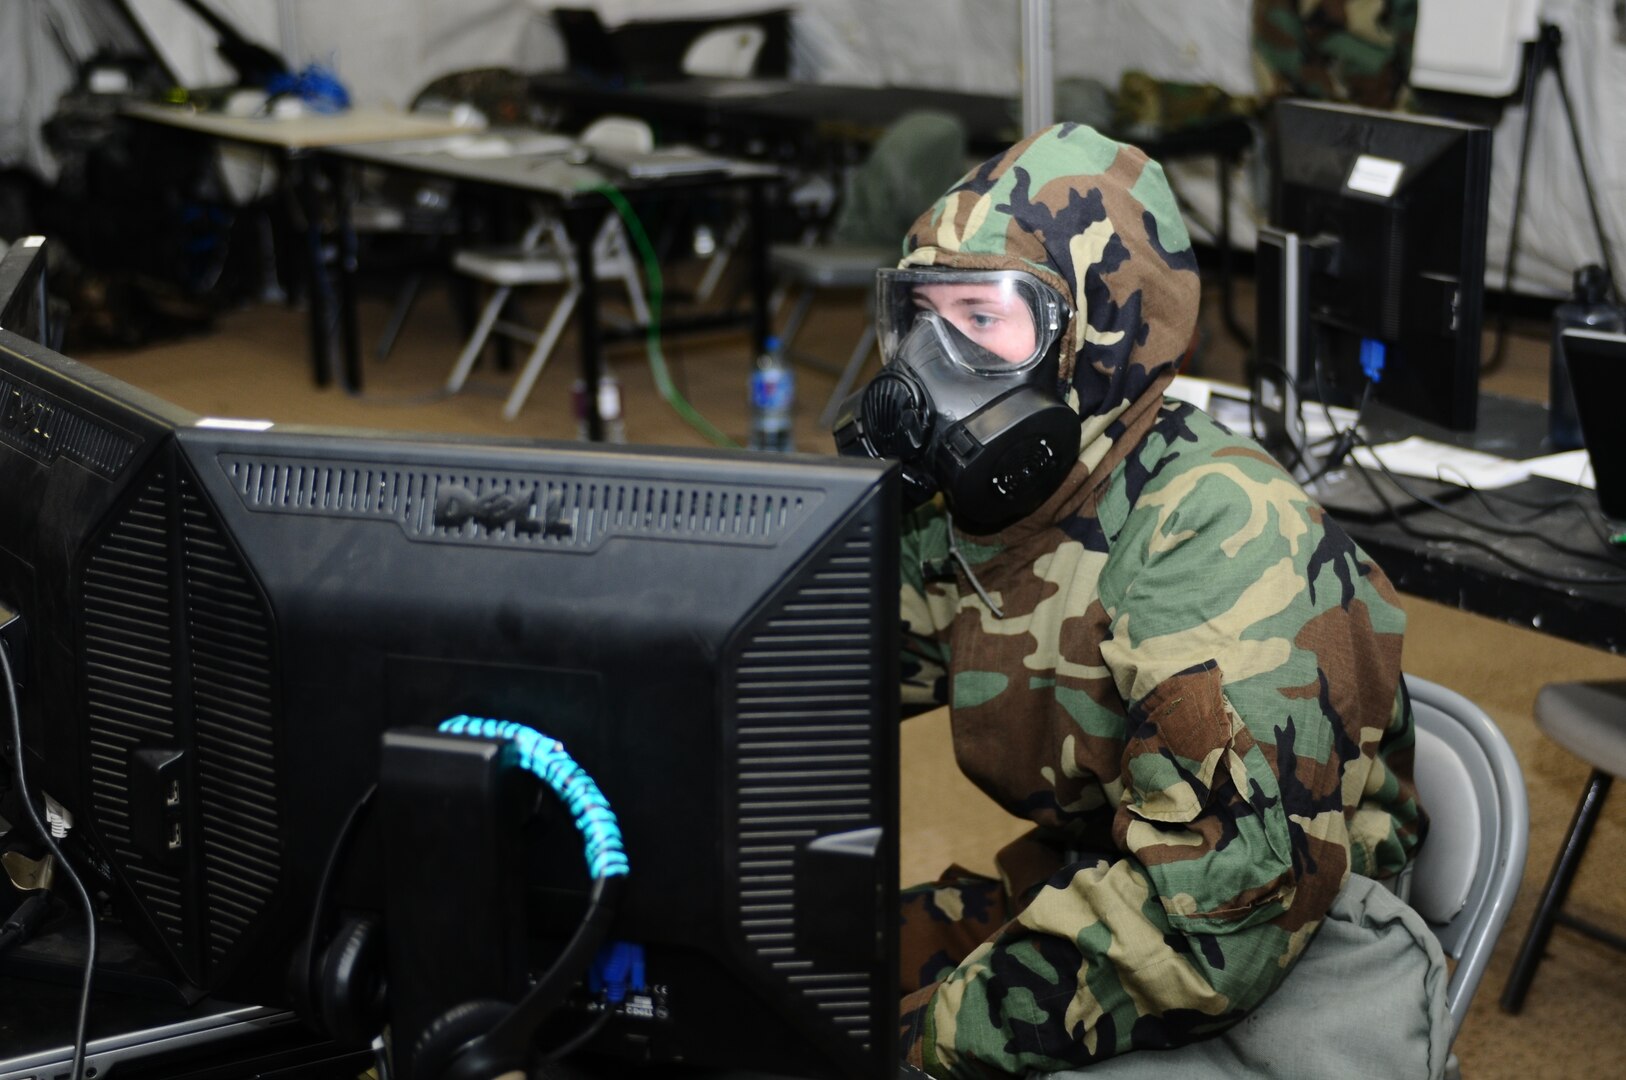 Soldiers of 210th Field Artillery Brigade, 2nd Infantry Division/ ROK-U.S Combined Division, conduct operations in a simulated chemically contaminated environment during a combined counterfire exercise at Thunder Field, Camp Casey, South Korea, Jan. 27, 2016.  (Photo by CPL Jaewoo Oh, USA)